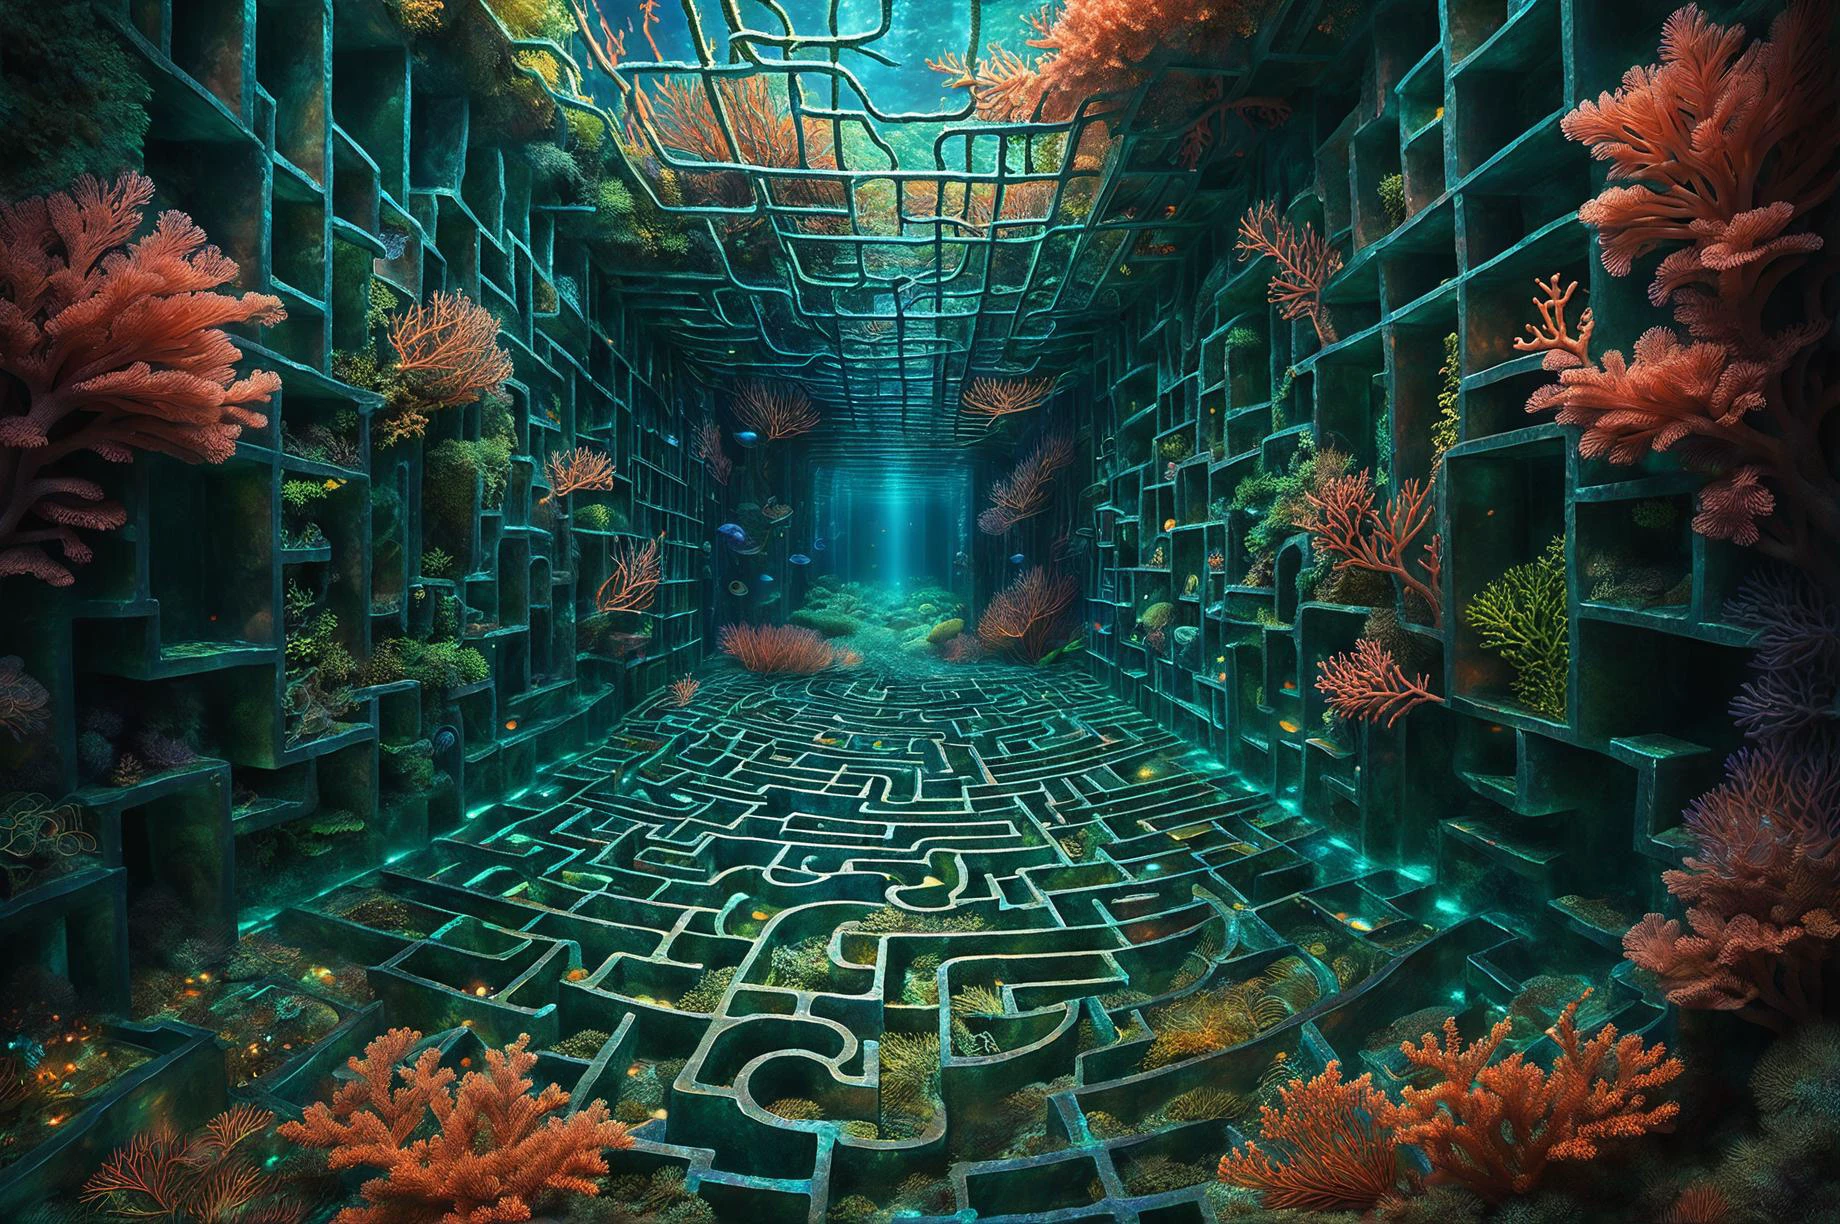 photorealistic, detailed digital illustration of a A coral labyrinth with iridescent walls, home to elusive sea creatures that navigate the maze with grace, leaving trails of glowing bio trails intheir wake  PENeonUV, liminal